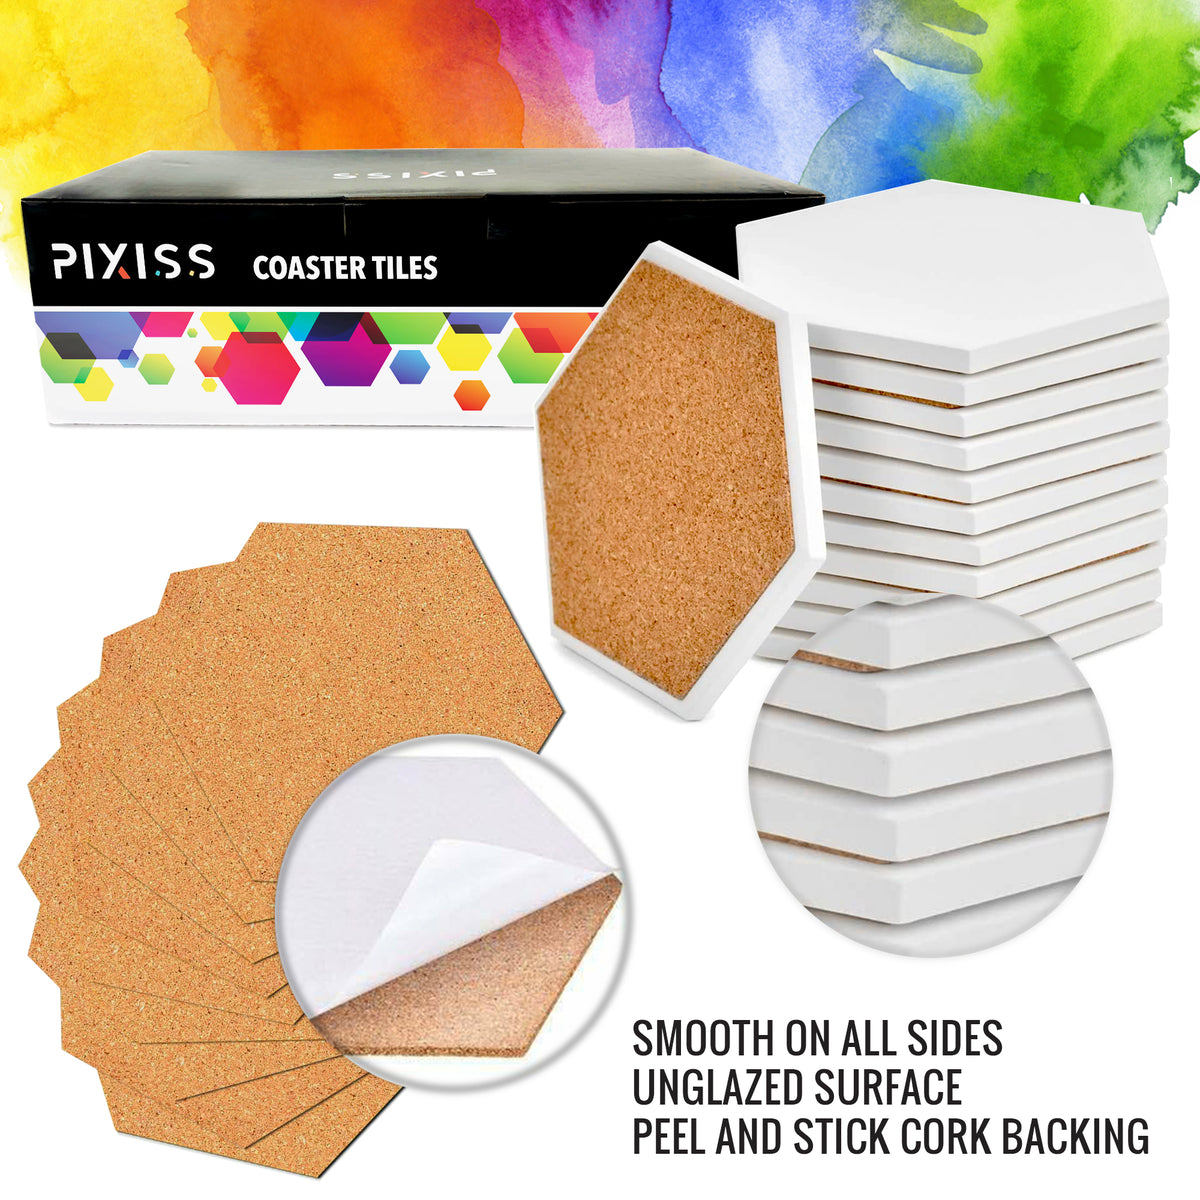 PIXISS Hexagon Ceramic Coasters with Cork Backing - 50 – Pixiss